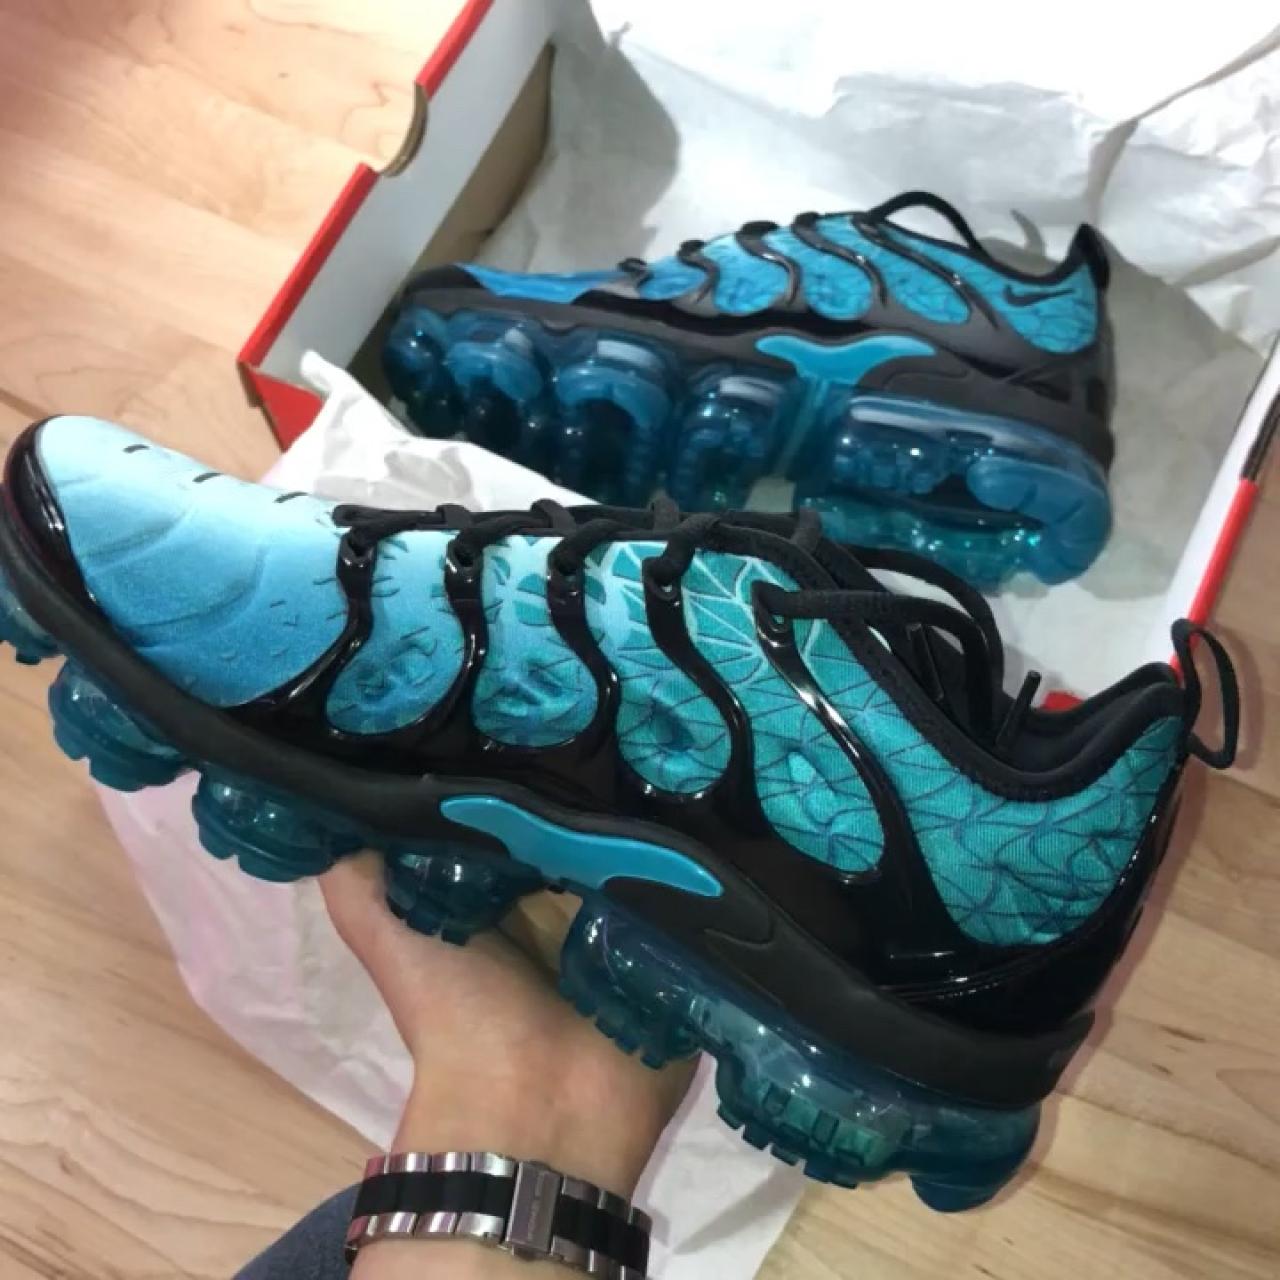 Discount Outlet Nike Air VaporMax Plus Wei Black reduced